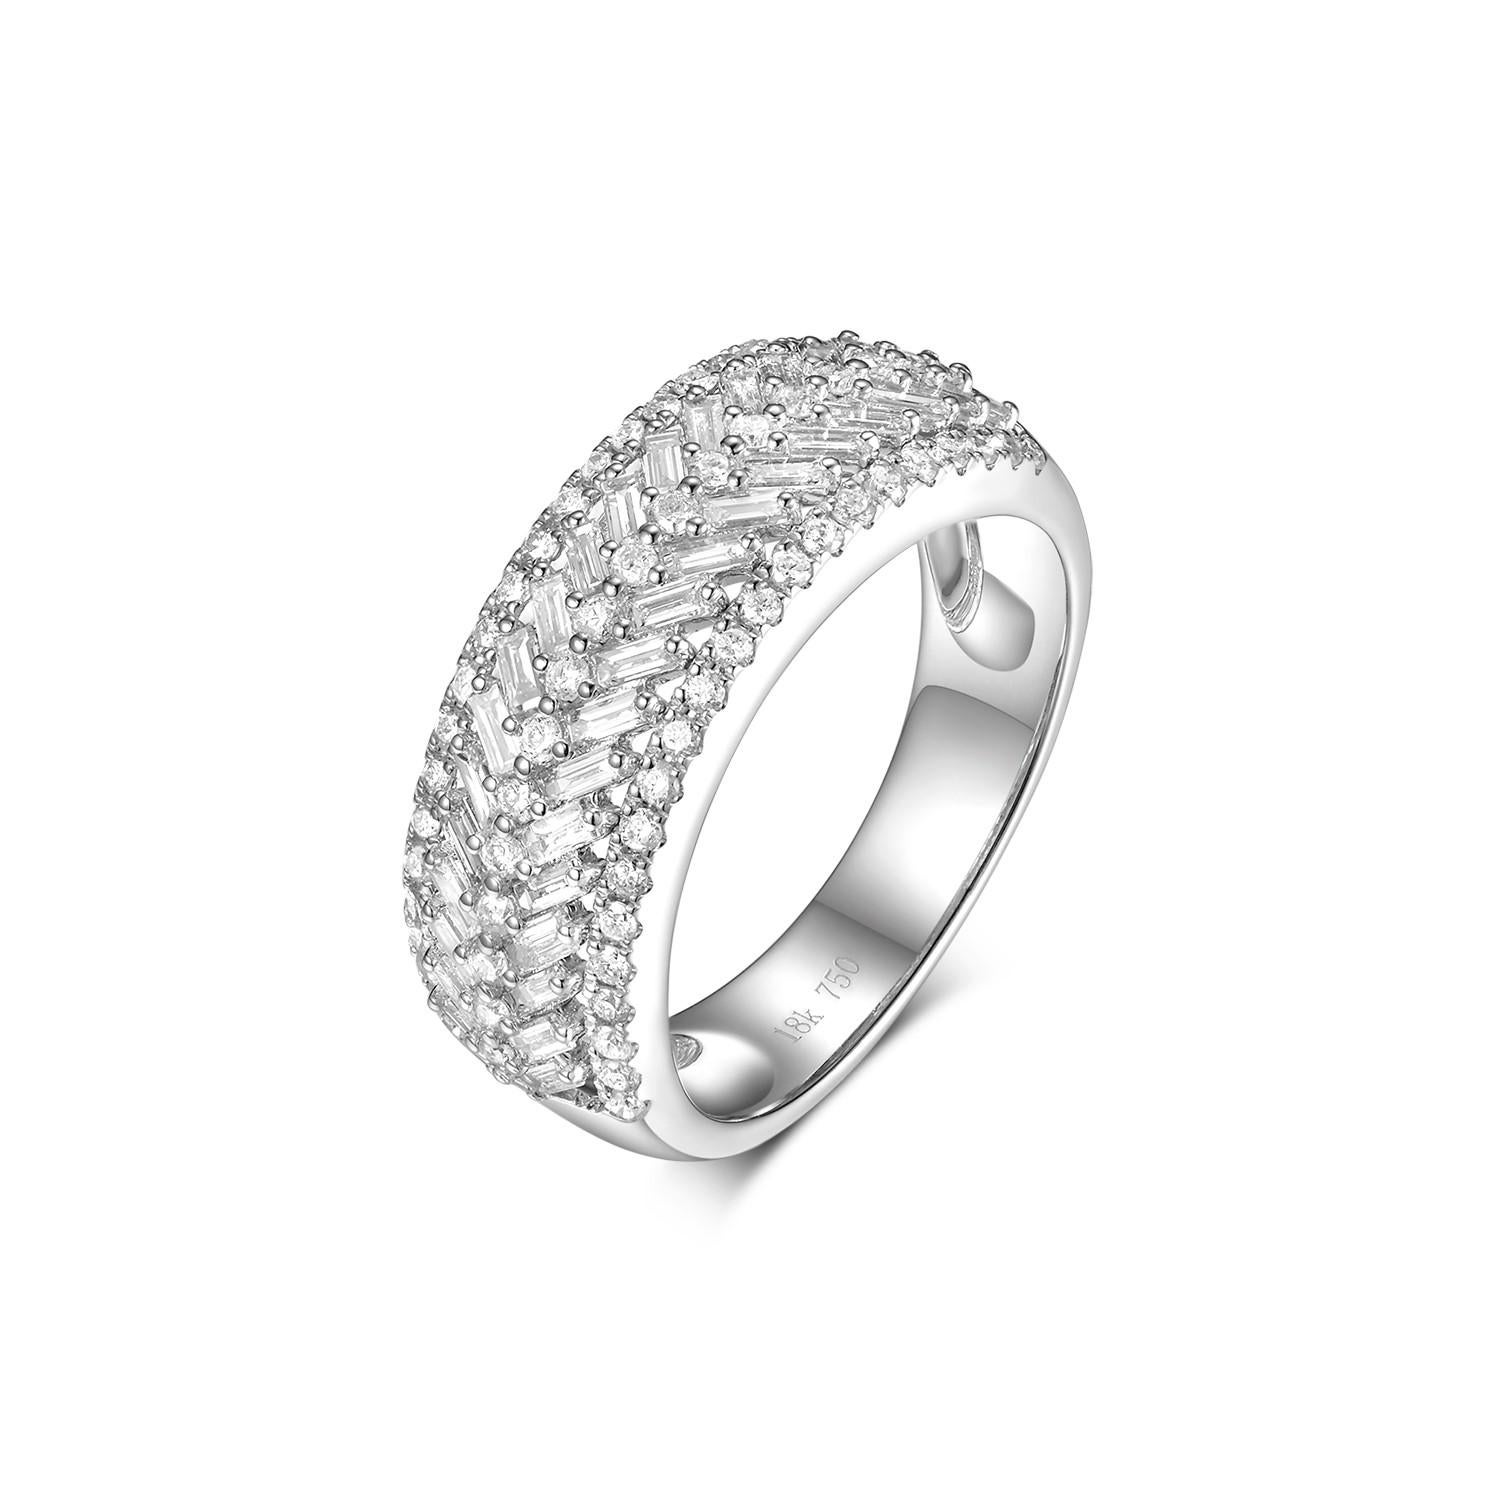 This half diamond band ring features 0.54 carat of baguette diamonds and 0.39 carat of round diamonds. Diamonds are set in 18 karat white gold. Great for everyday use and it is stack-able with other thinner band rings. 

US 6.5
Resizing is